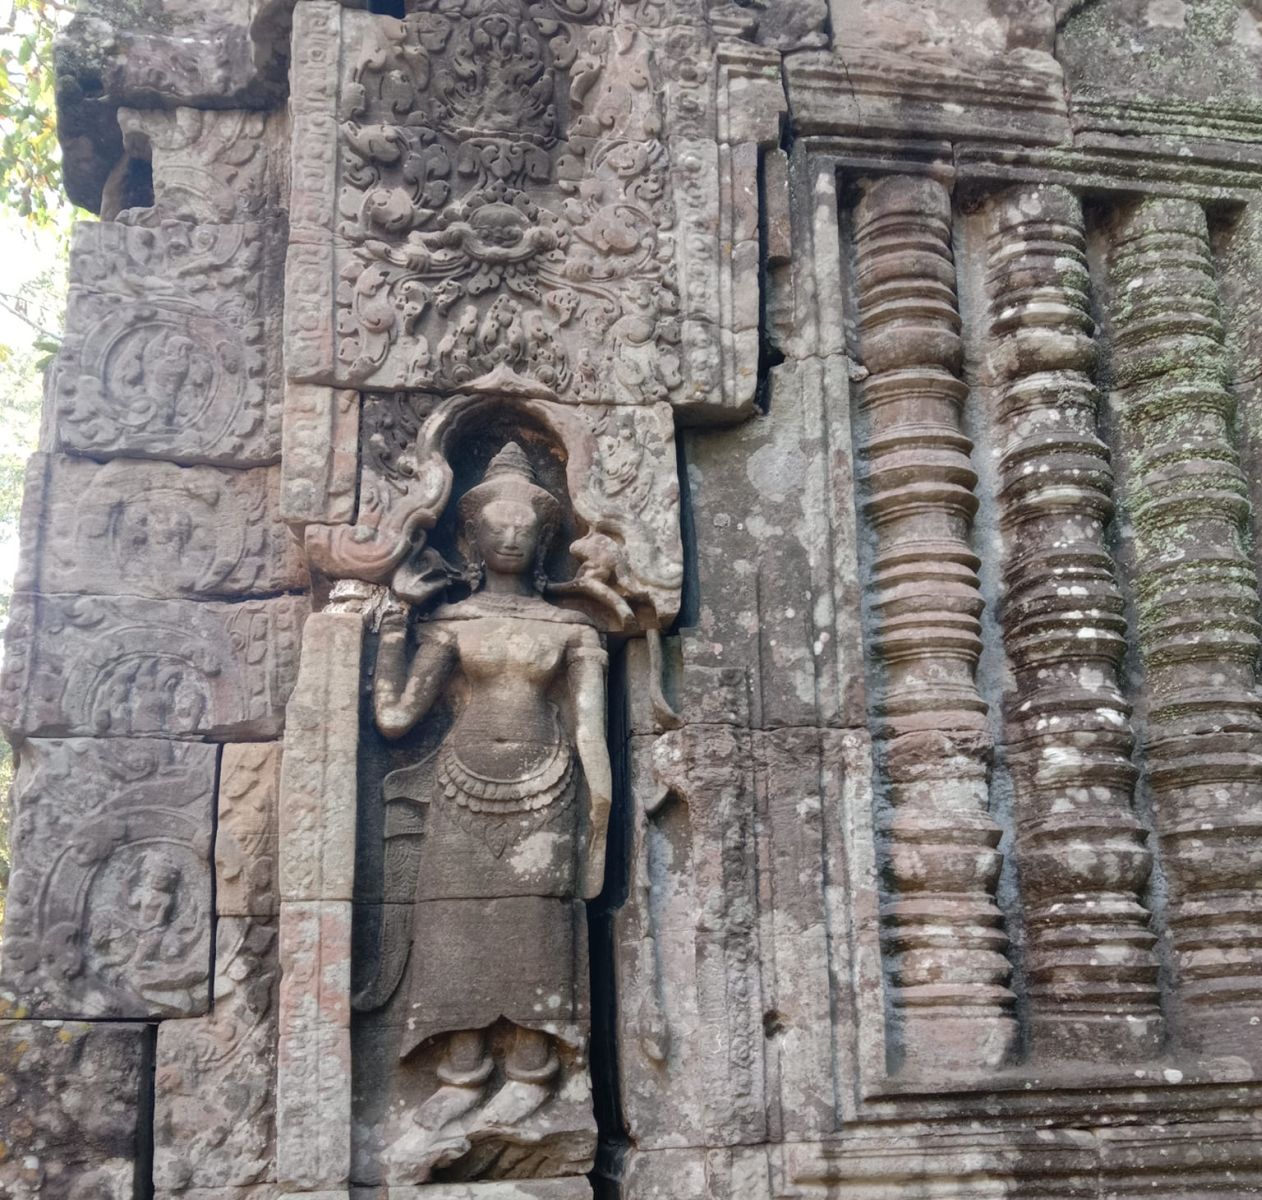 Hindu bas-relief on temple in Angkor Wat in northern Cambodia